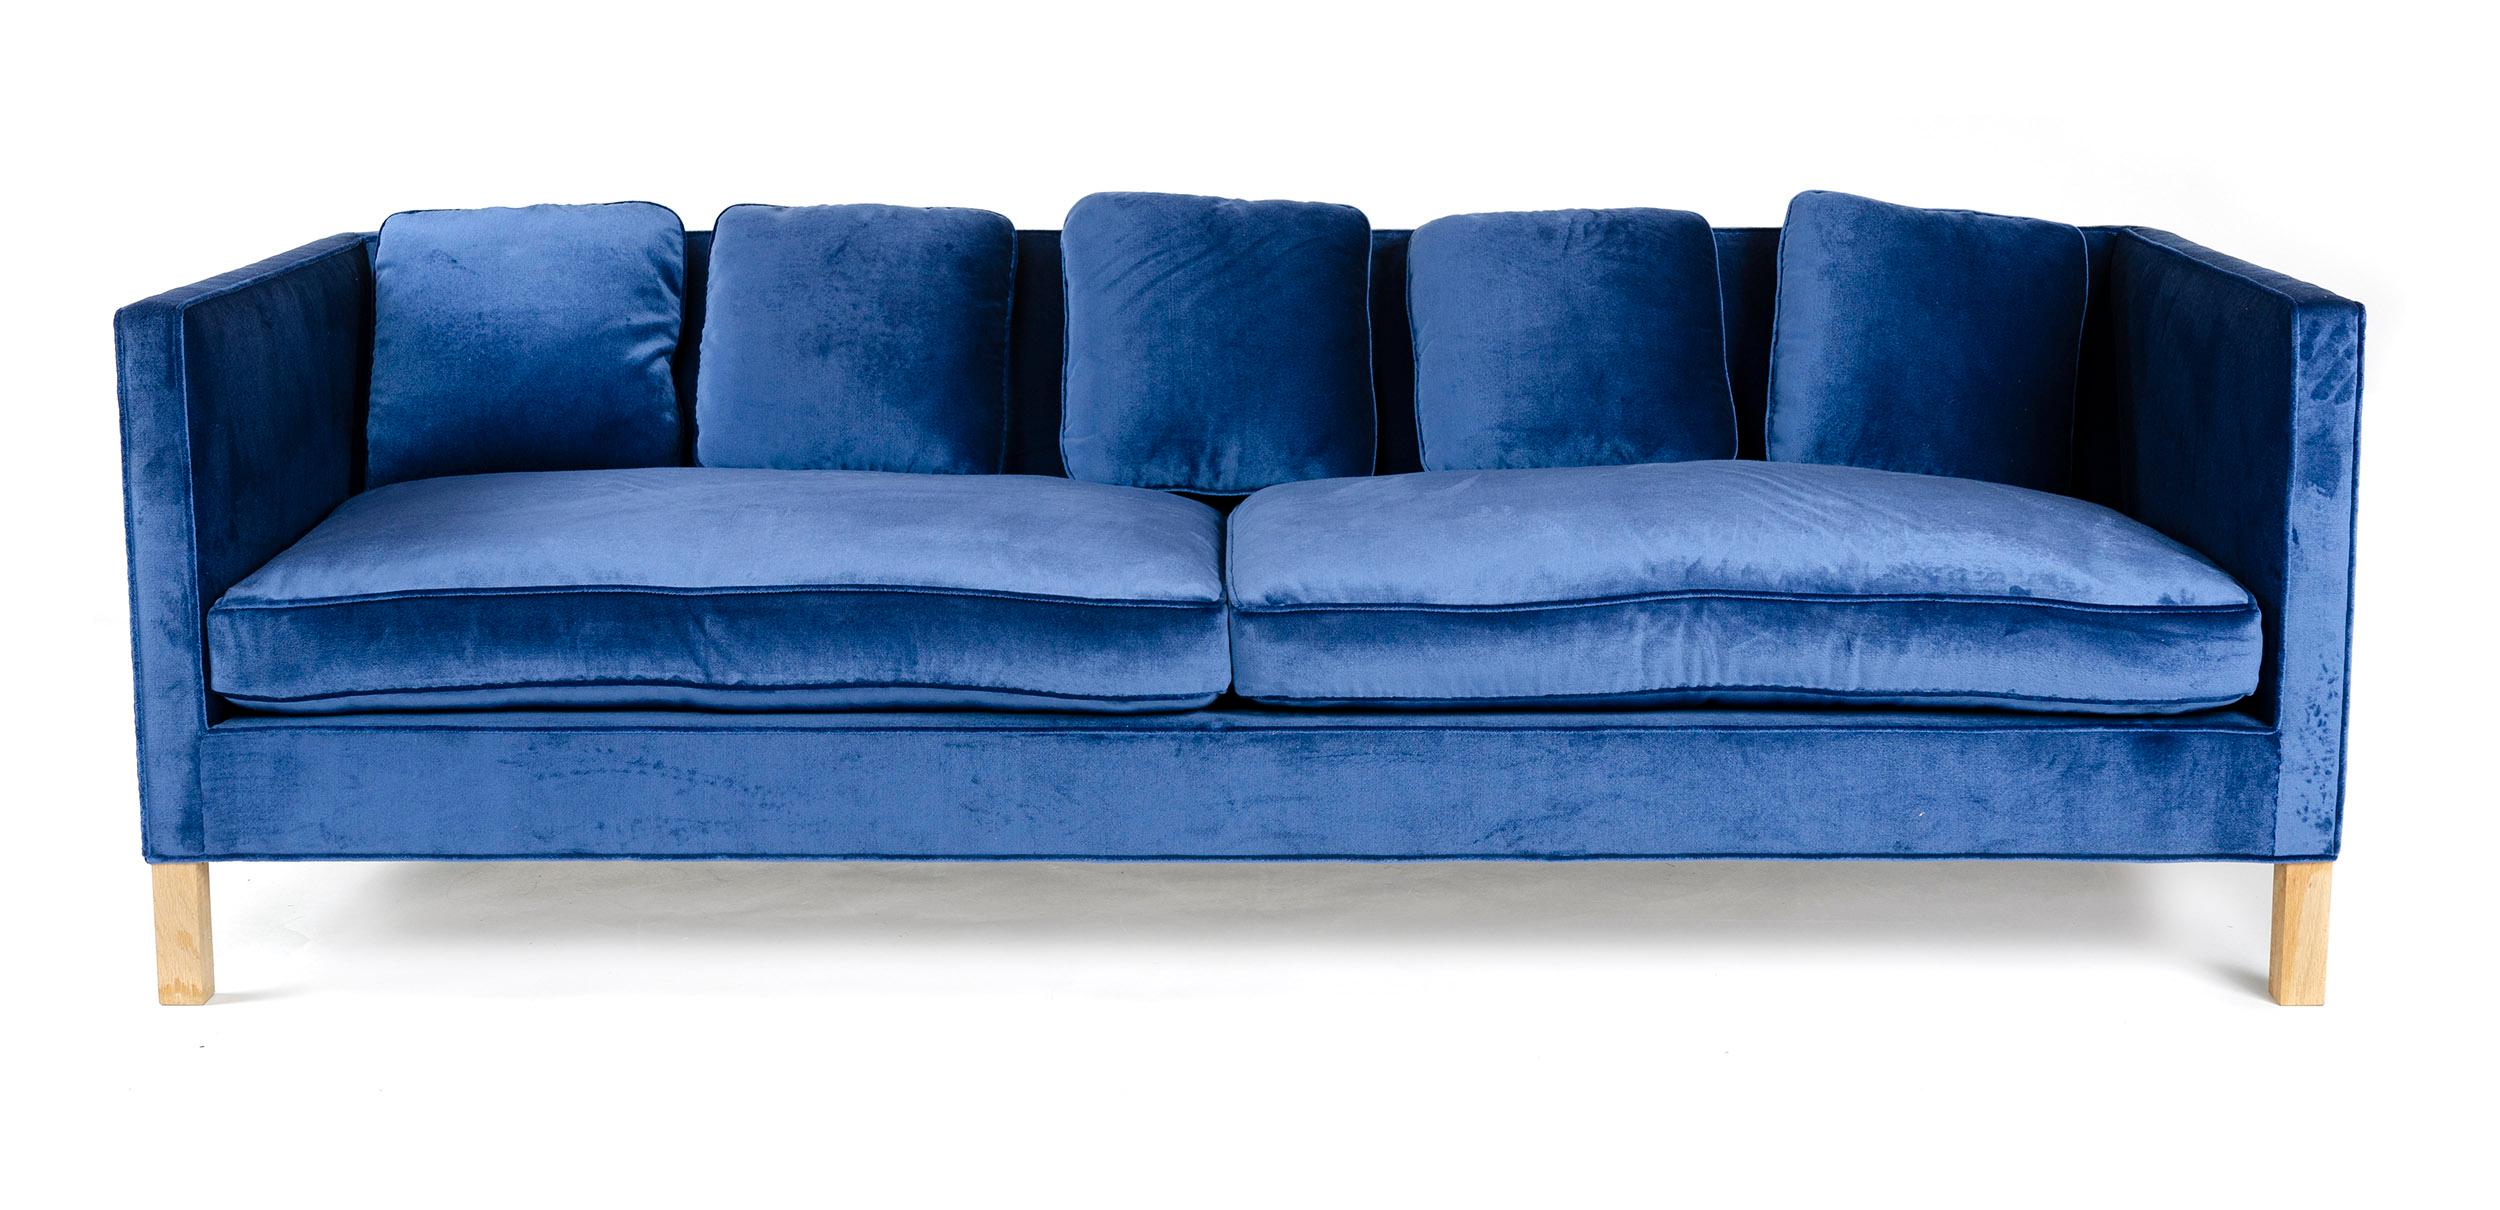 A minimal tuxedo sofa with solid wood frame and hand tied springs having down-filled cushions and pillow backs upholstered in blue cotton velvet.

  